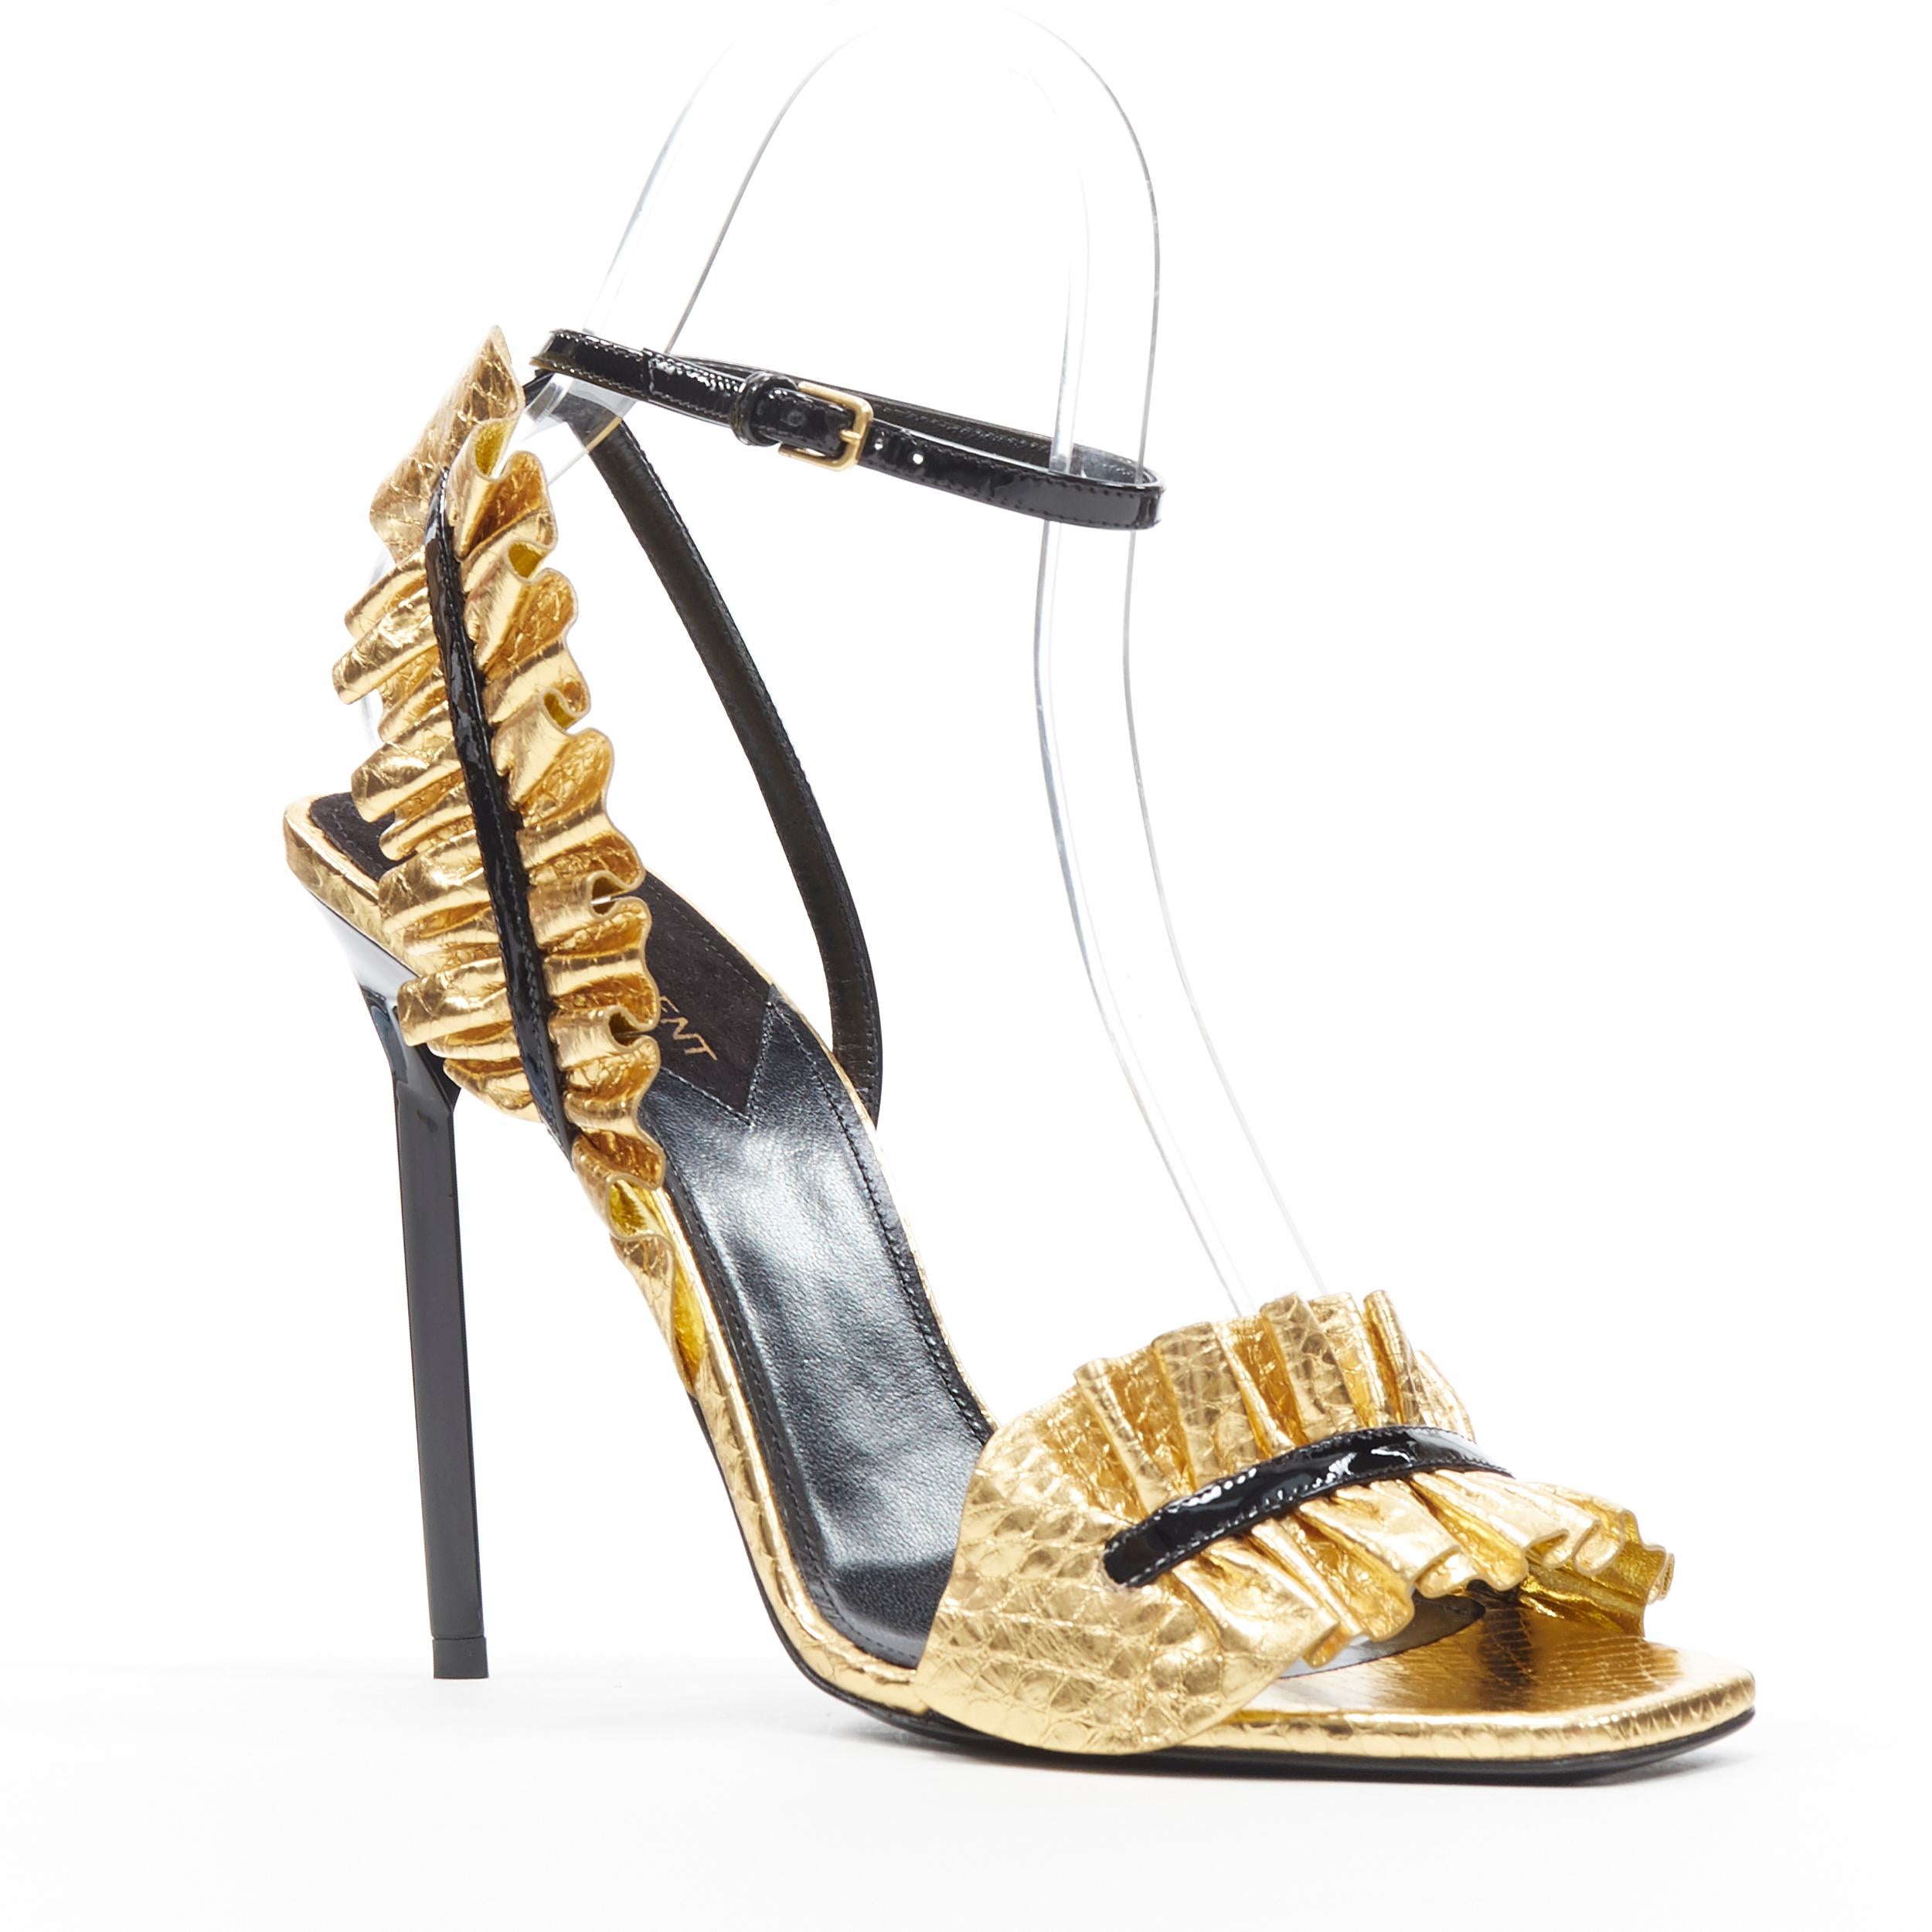 new GIUSEPPE ZANOTTI 20th Ans Cruel gold metal leaf strappy flat sandals EU38
Brand: Giuseppe Zanotti
Model Name / Style: Cruel
Material: Leather, metal
Color: Gold
Pattern: Solid
Closure: Buckle
Extra Detail: Coveted Cruel leaf design. Strappy gold